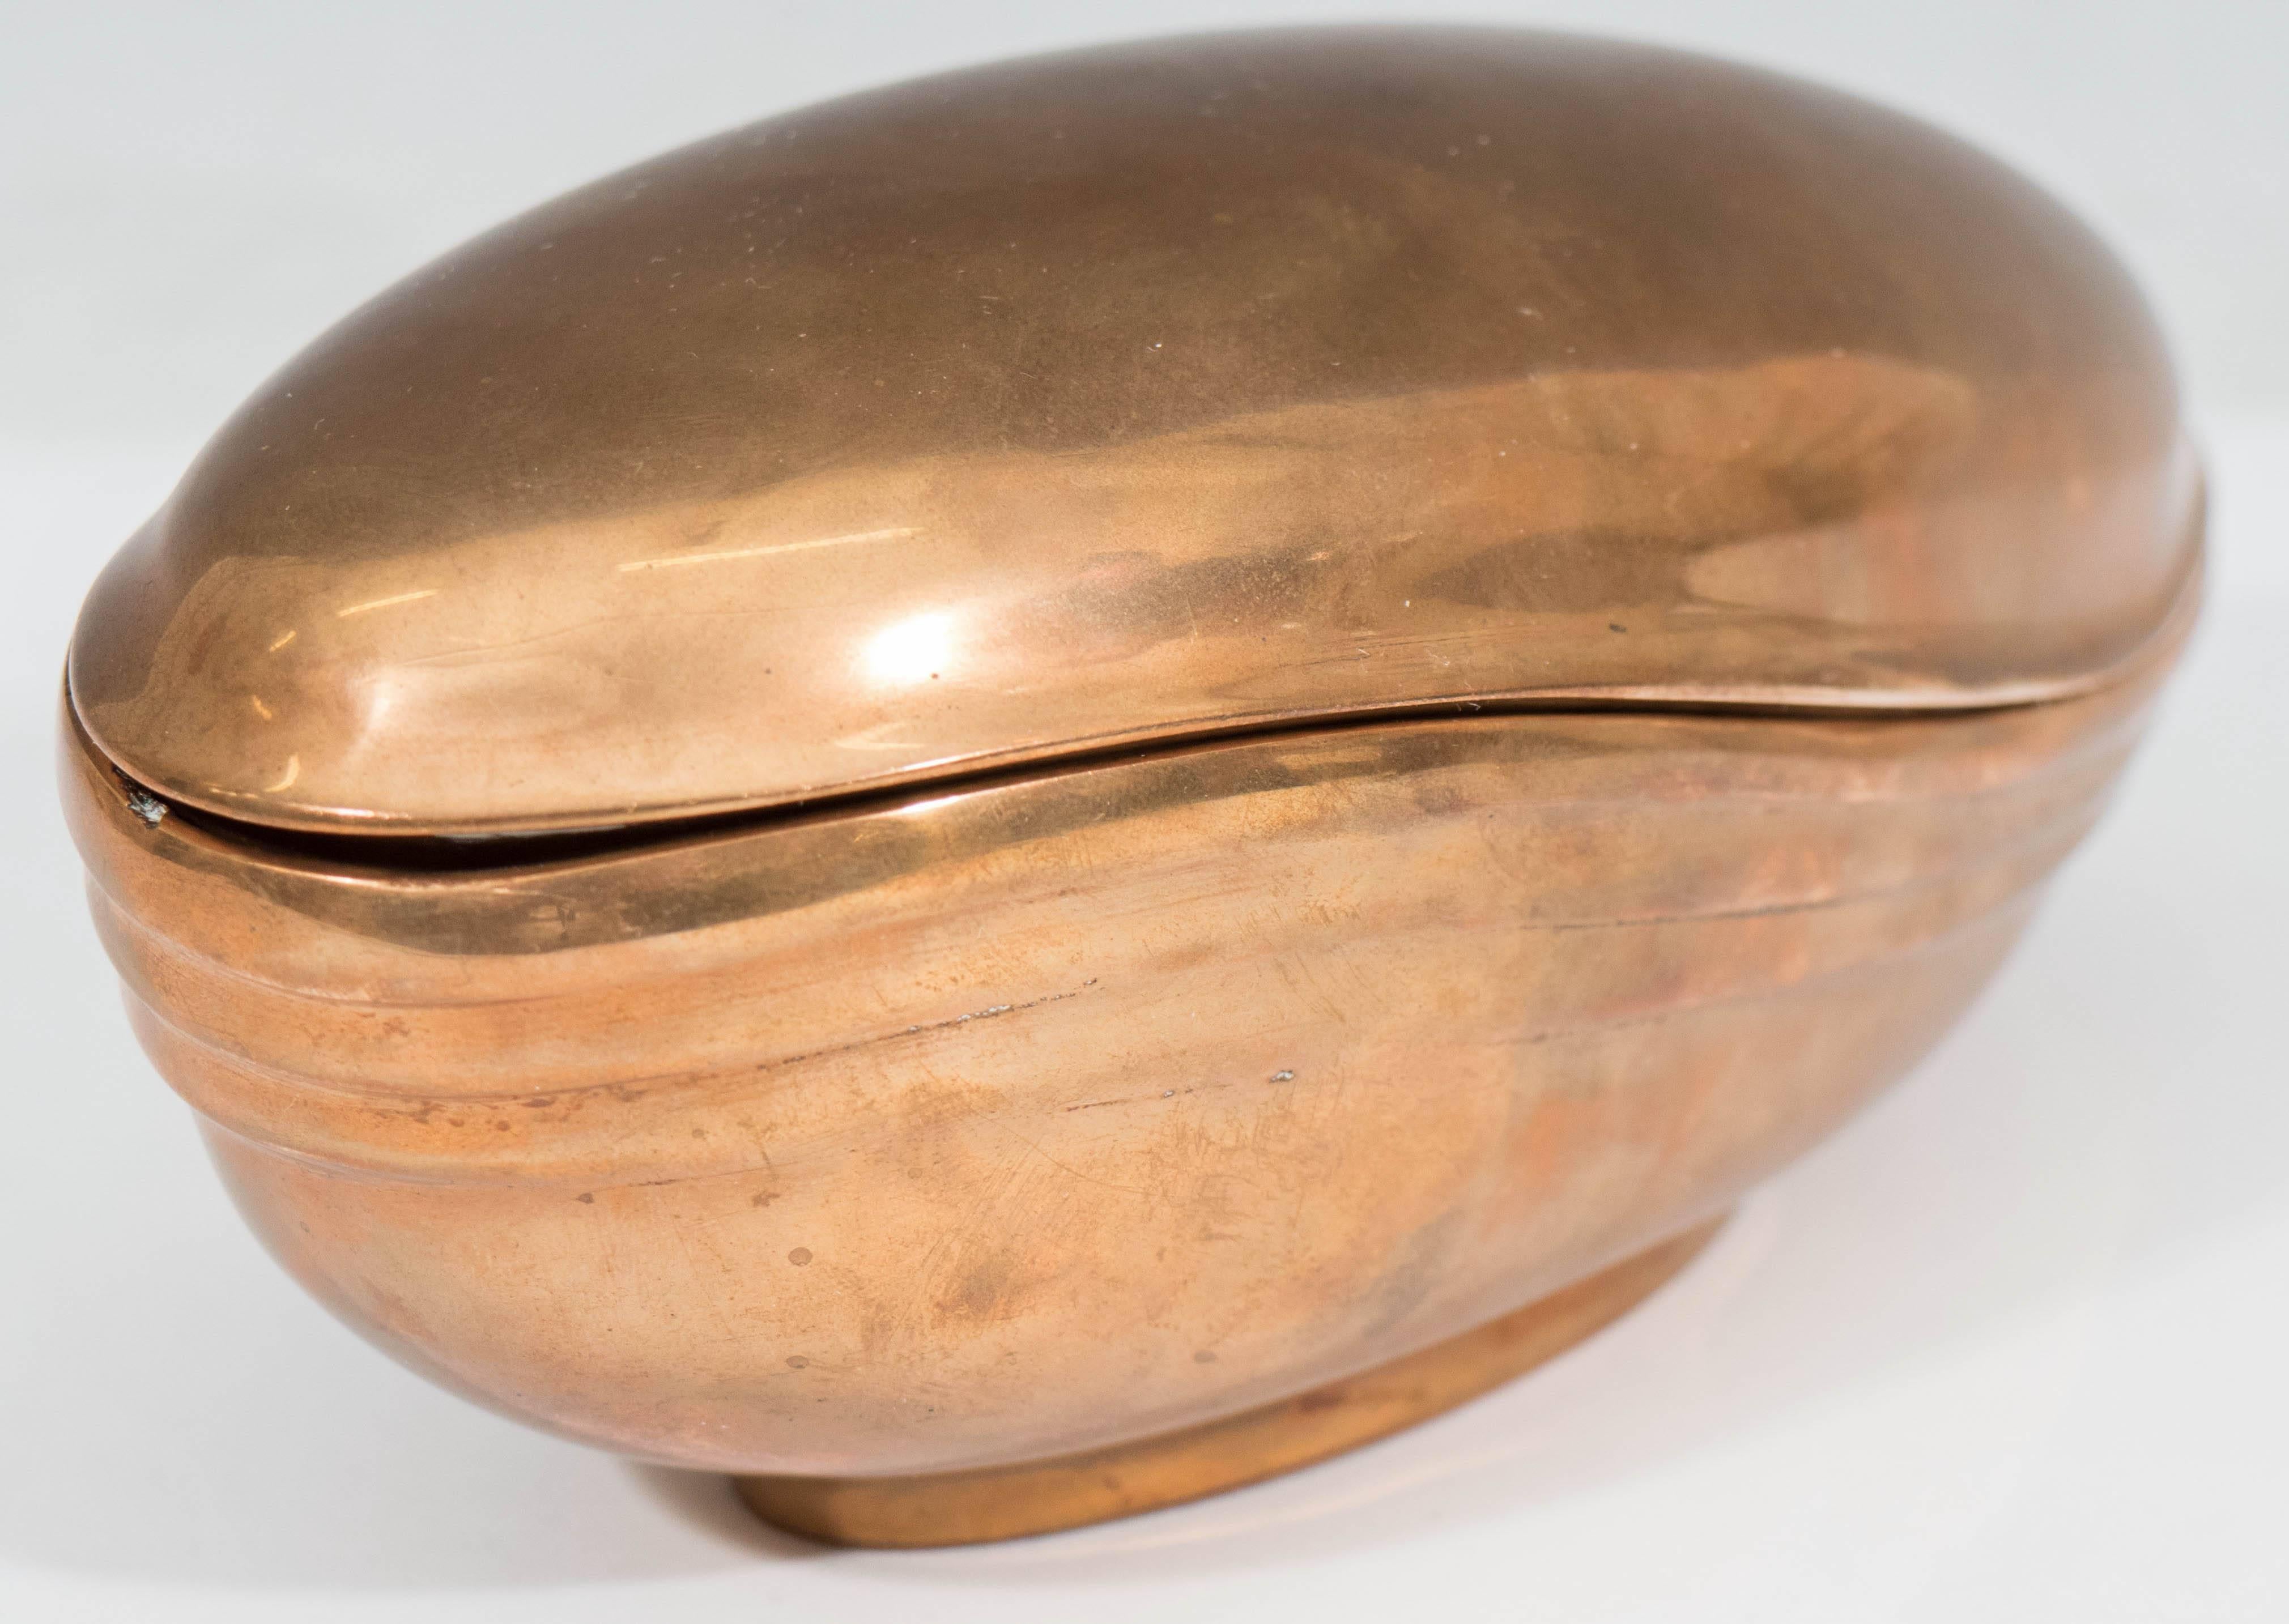 An Italian rounded covered decorative bowl in heavy bronze, produced circa 1980s by artist Esa Fedrigolli. Markings include the artist's signature [Esa Fedrigolli] and label [Esart/Made in Italy] to the bottom, as well as additional label to the top